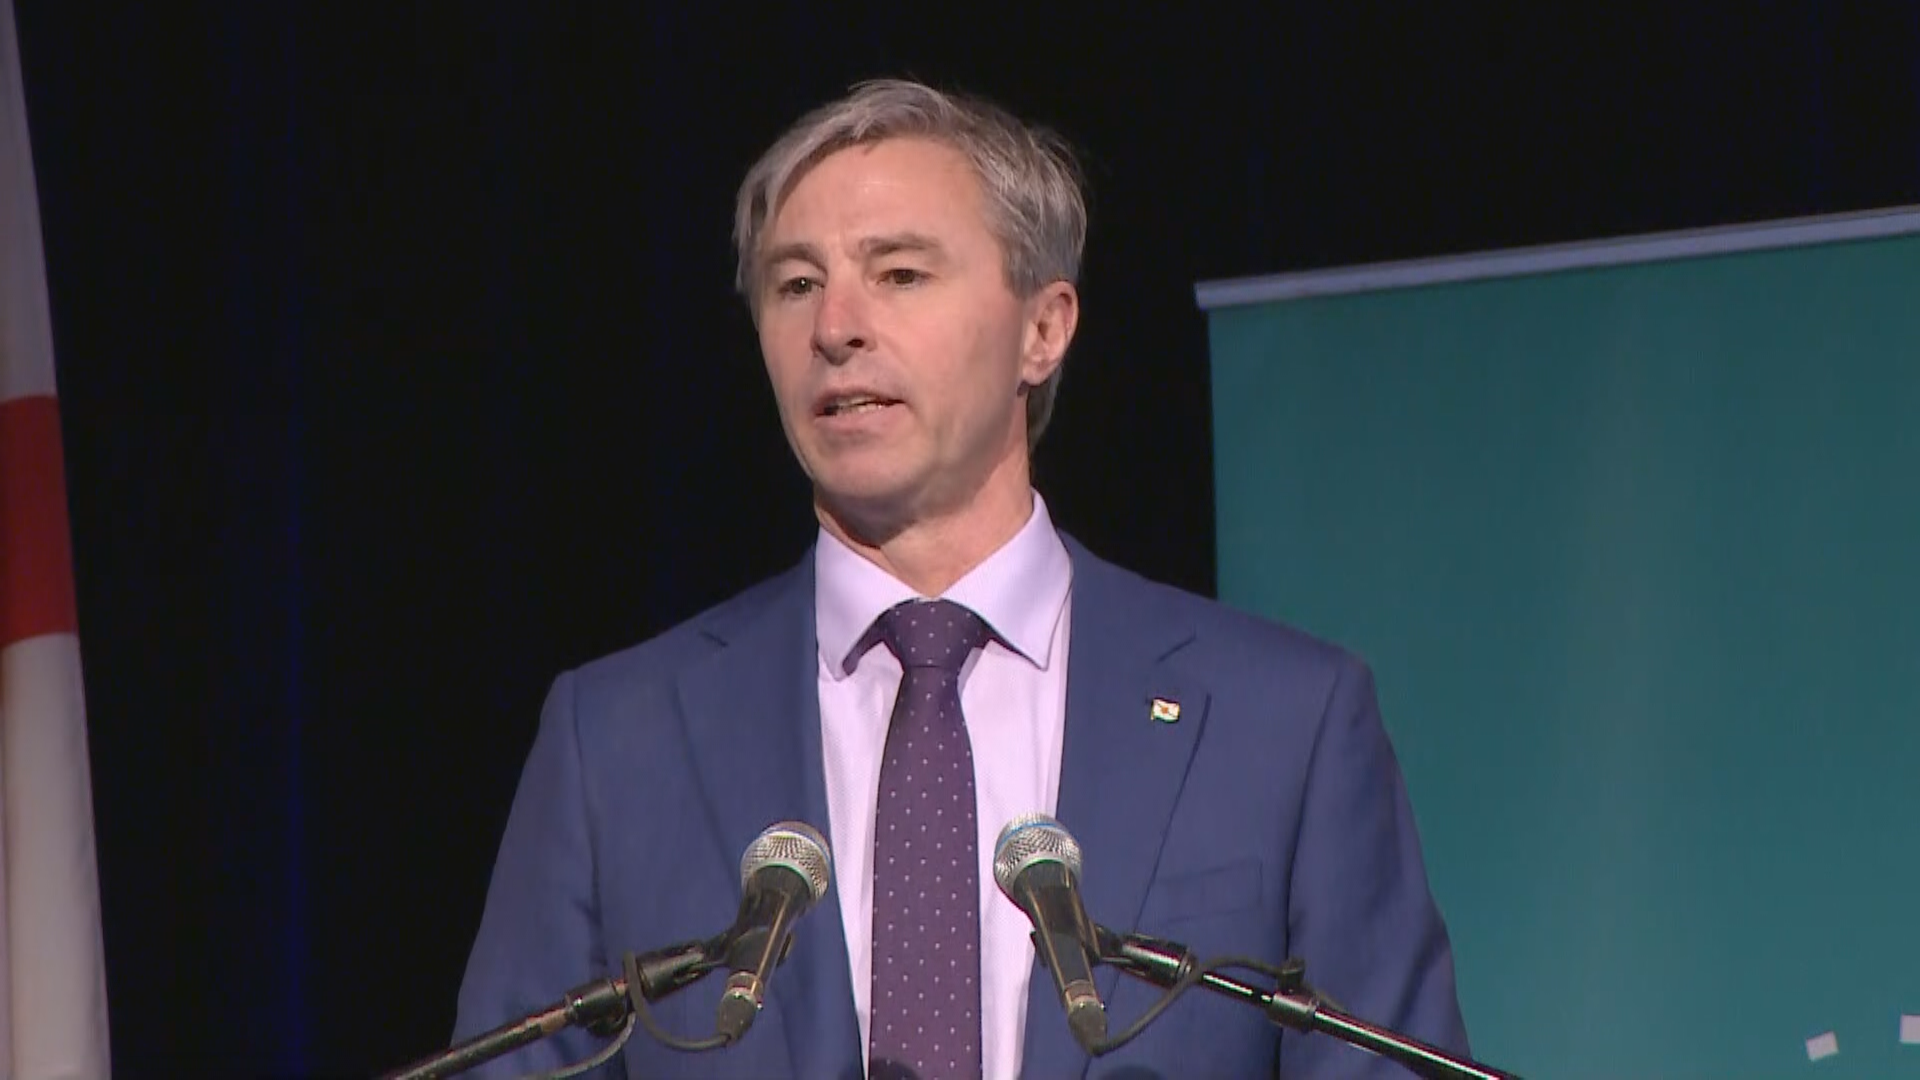 Premier tells party at AGM fixing health care in N.S. an ‘urgent’ priority – Halifax | Globalnews.ca